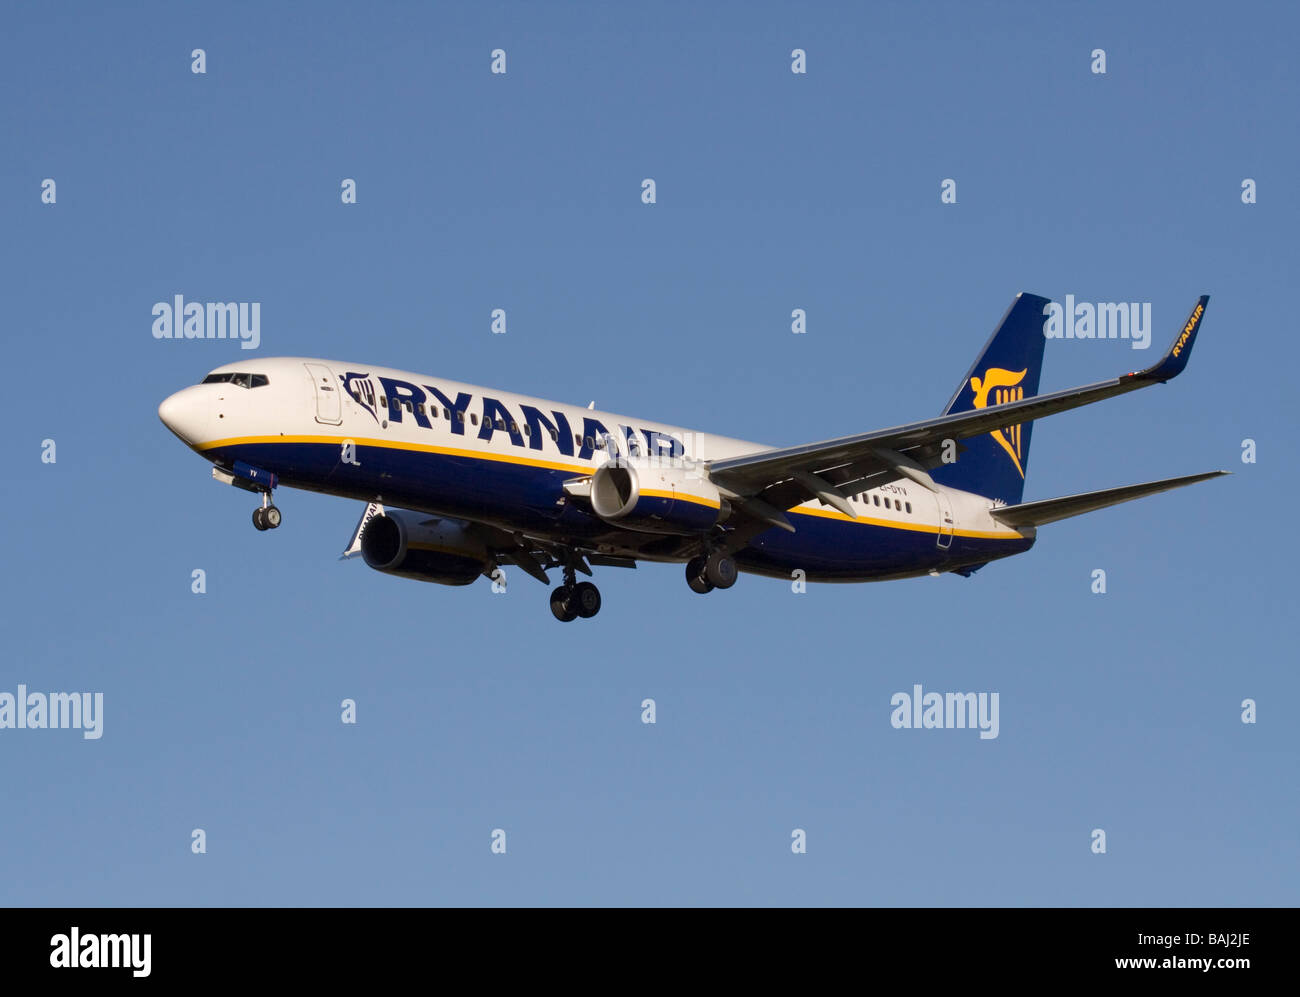 Cheap air travel and mass tourism. Ryanair Boeing 737-800 jet airplane on final approach against a clear blue sky Stock Photo